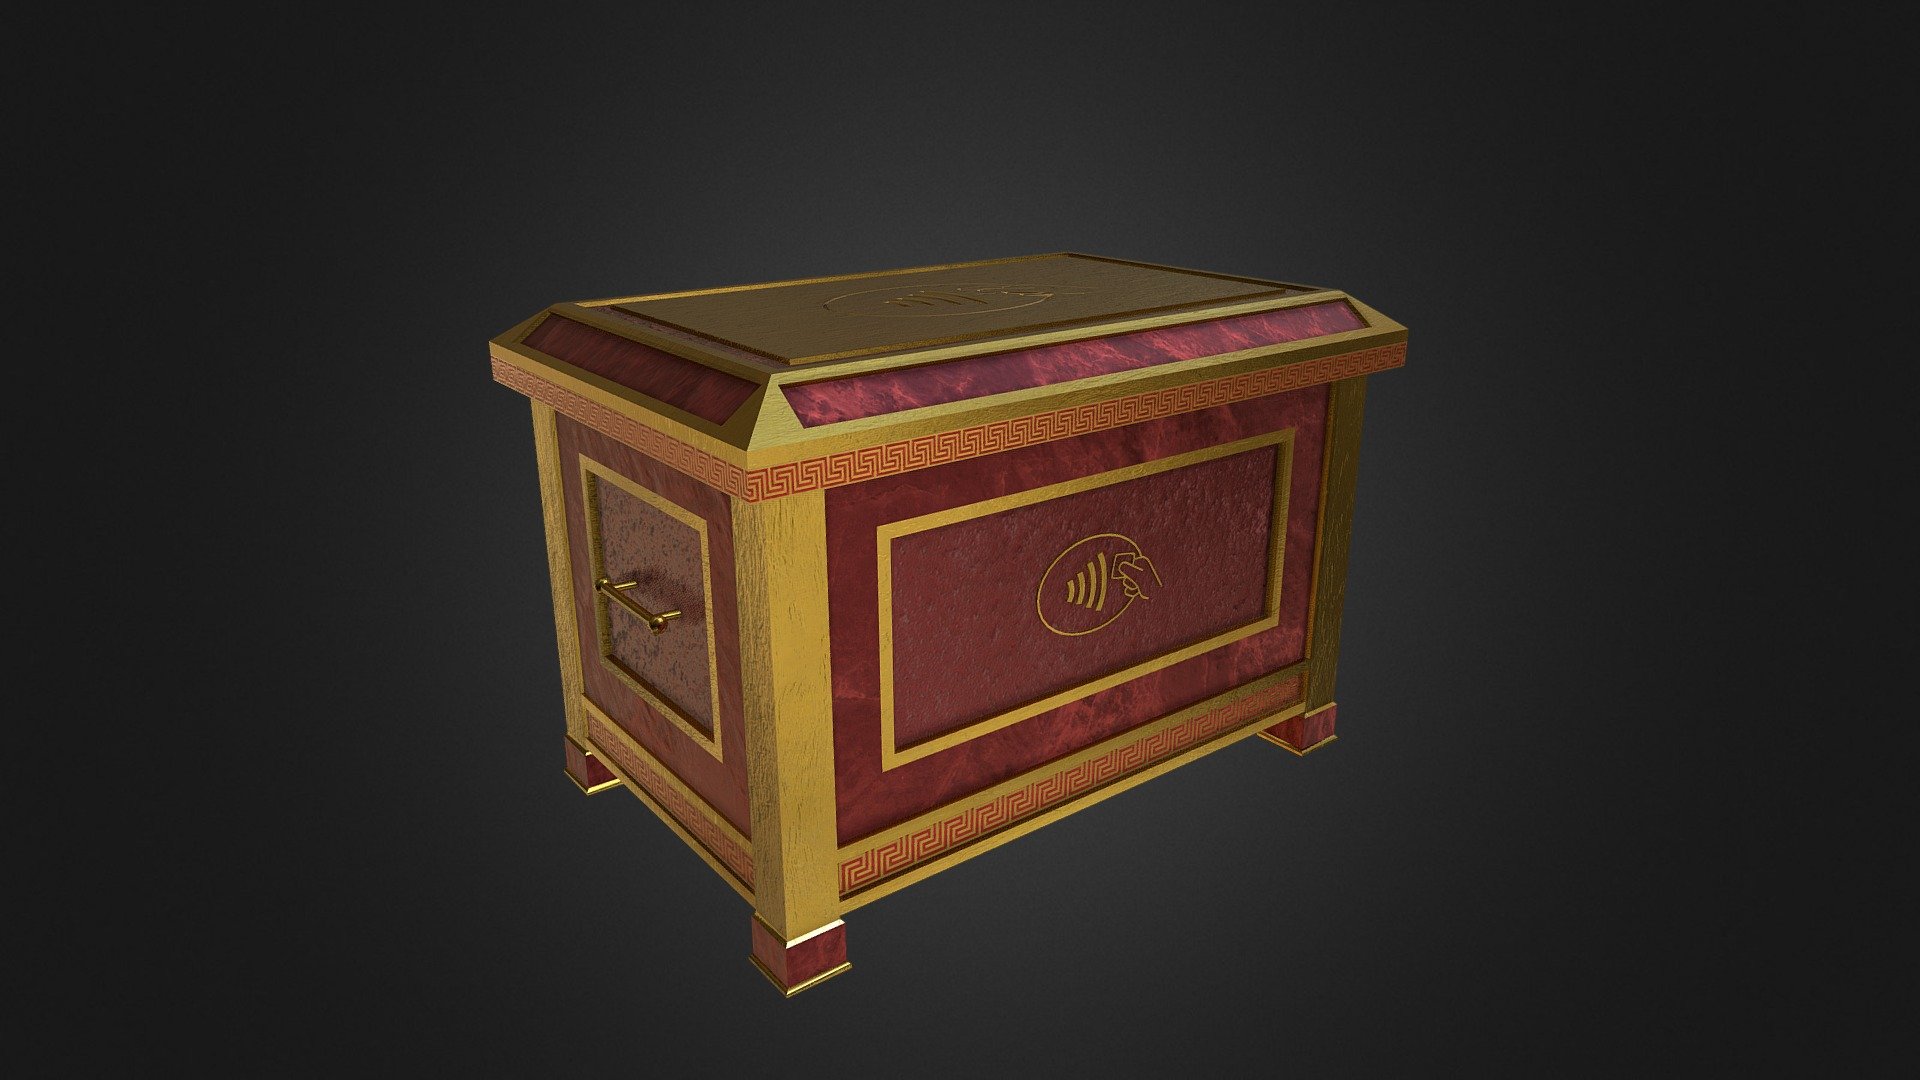 I didn't want to use any regular locking mechanisms for this, so I used the Paywave icon to give off the impression that a credit card would be required to open it. Similar to how loot boxes in games are.
Inspired by the Spartan chest design from Assassin's Creed: Odyssey.
Reference image used: https://i.pinimg.com/originals/e3/c7/78/e3c7782f8efa7c1568b986f14453a514.jpg - Loot Box - Closed - 3D model by Daniel Wilson (@rowdy92) 3d model